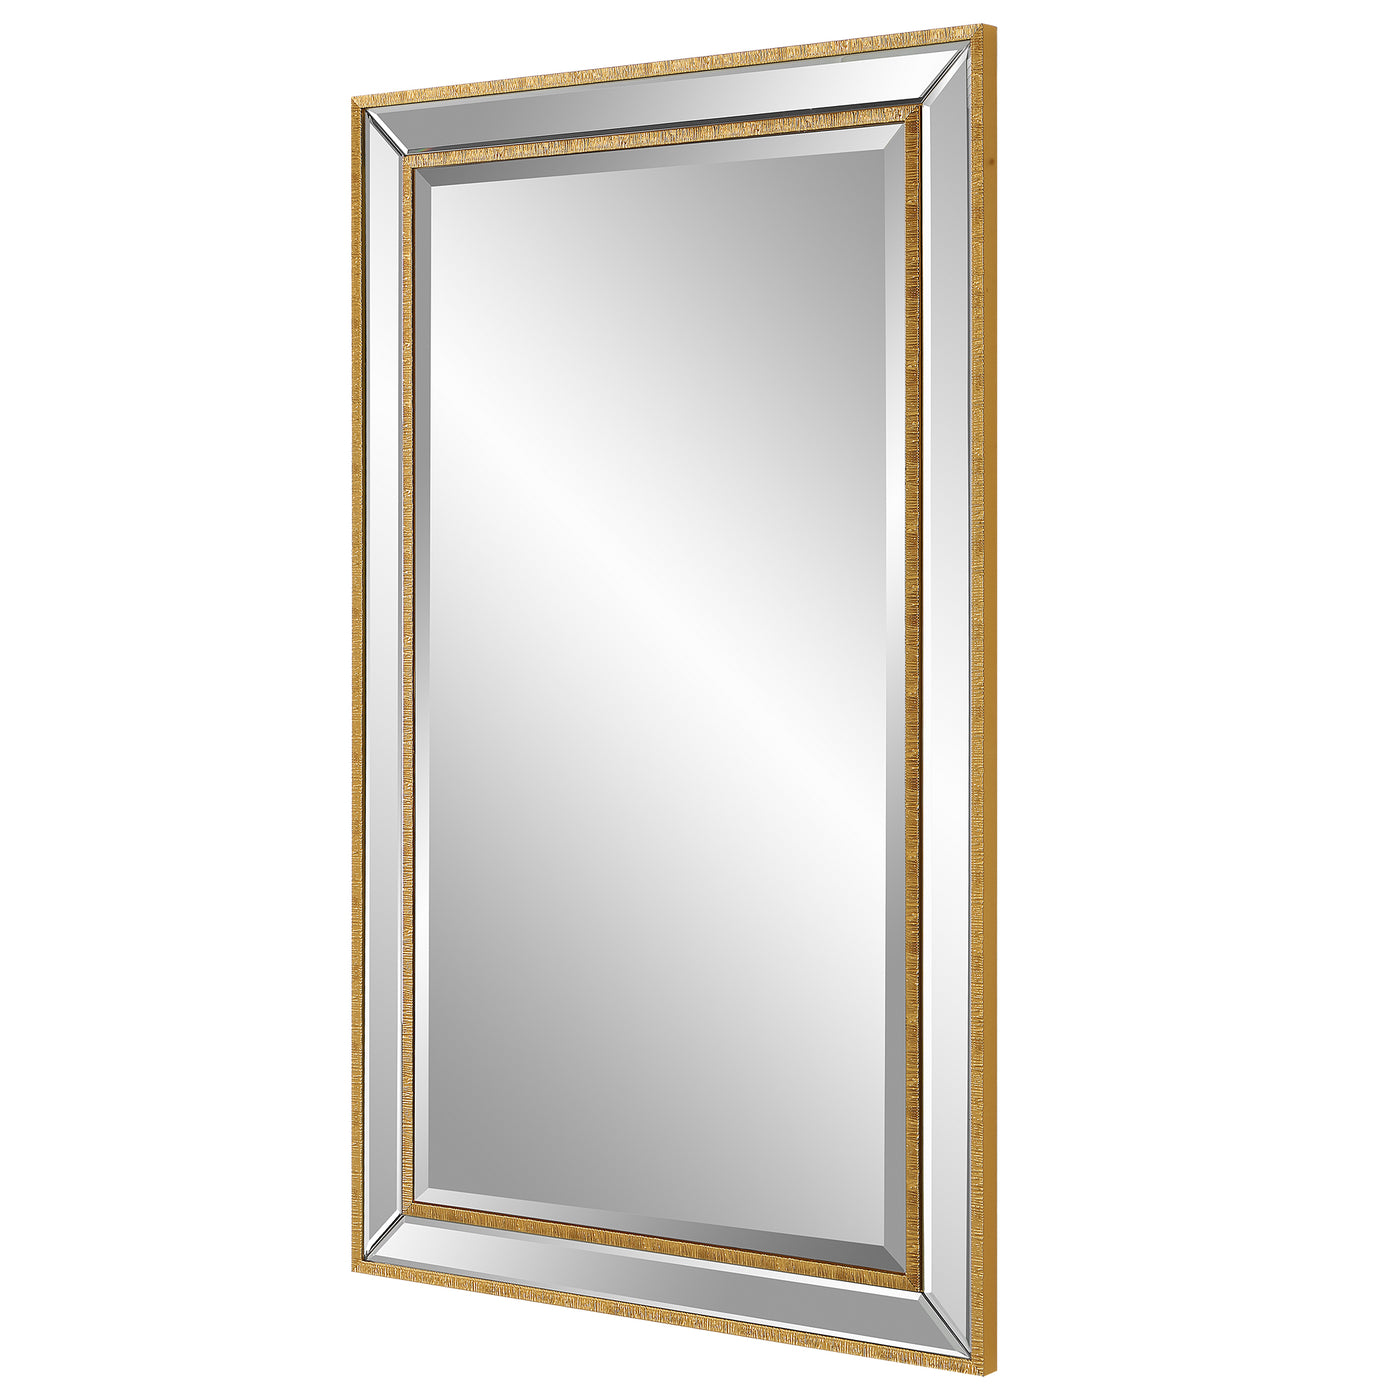 The Cape May - Rectangular Mirror with Beveled Mirrored Frame and Gold Trim